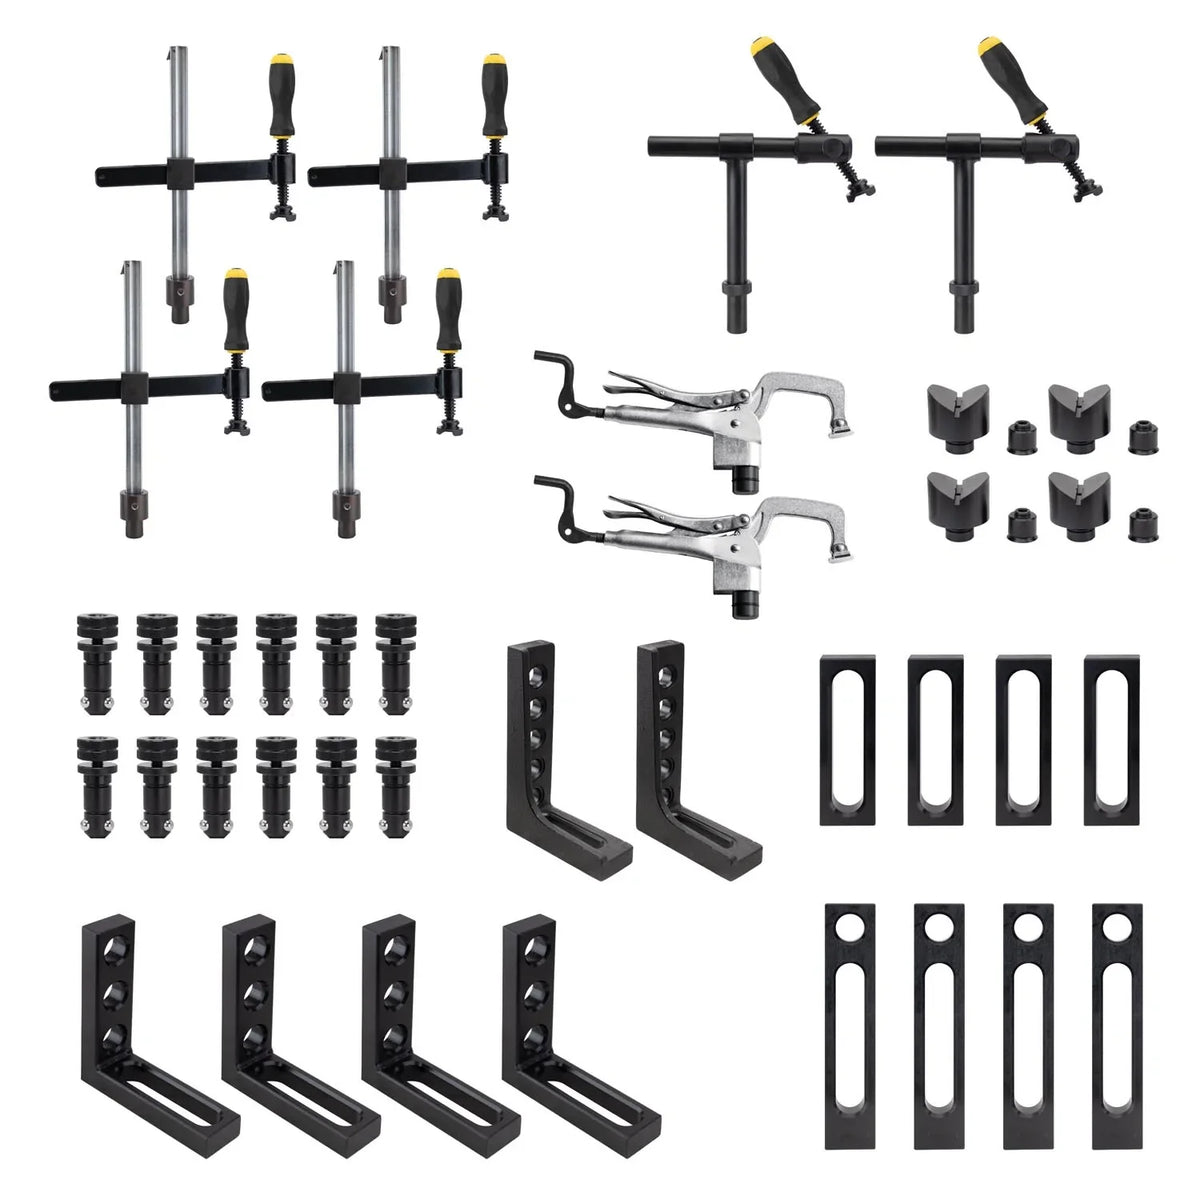 BuildPro Alpha 28 38-pc. Fixturing Kit, for 28mm Holes - T28-90101